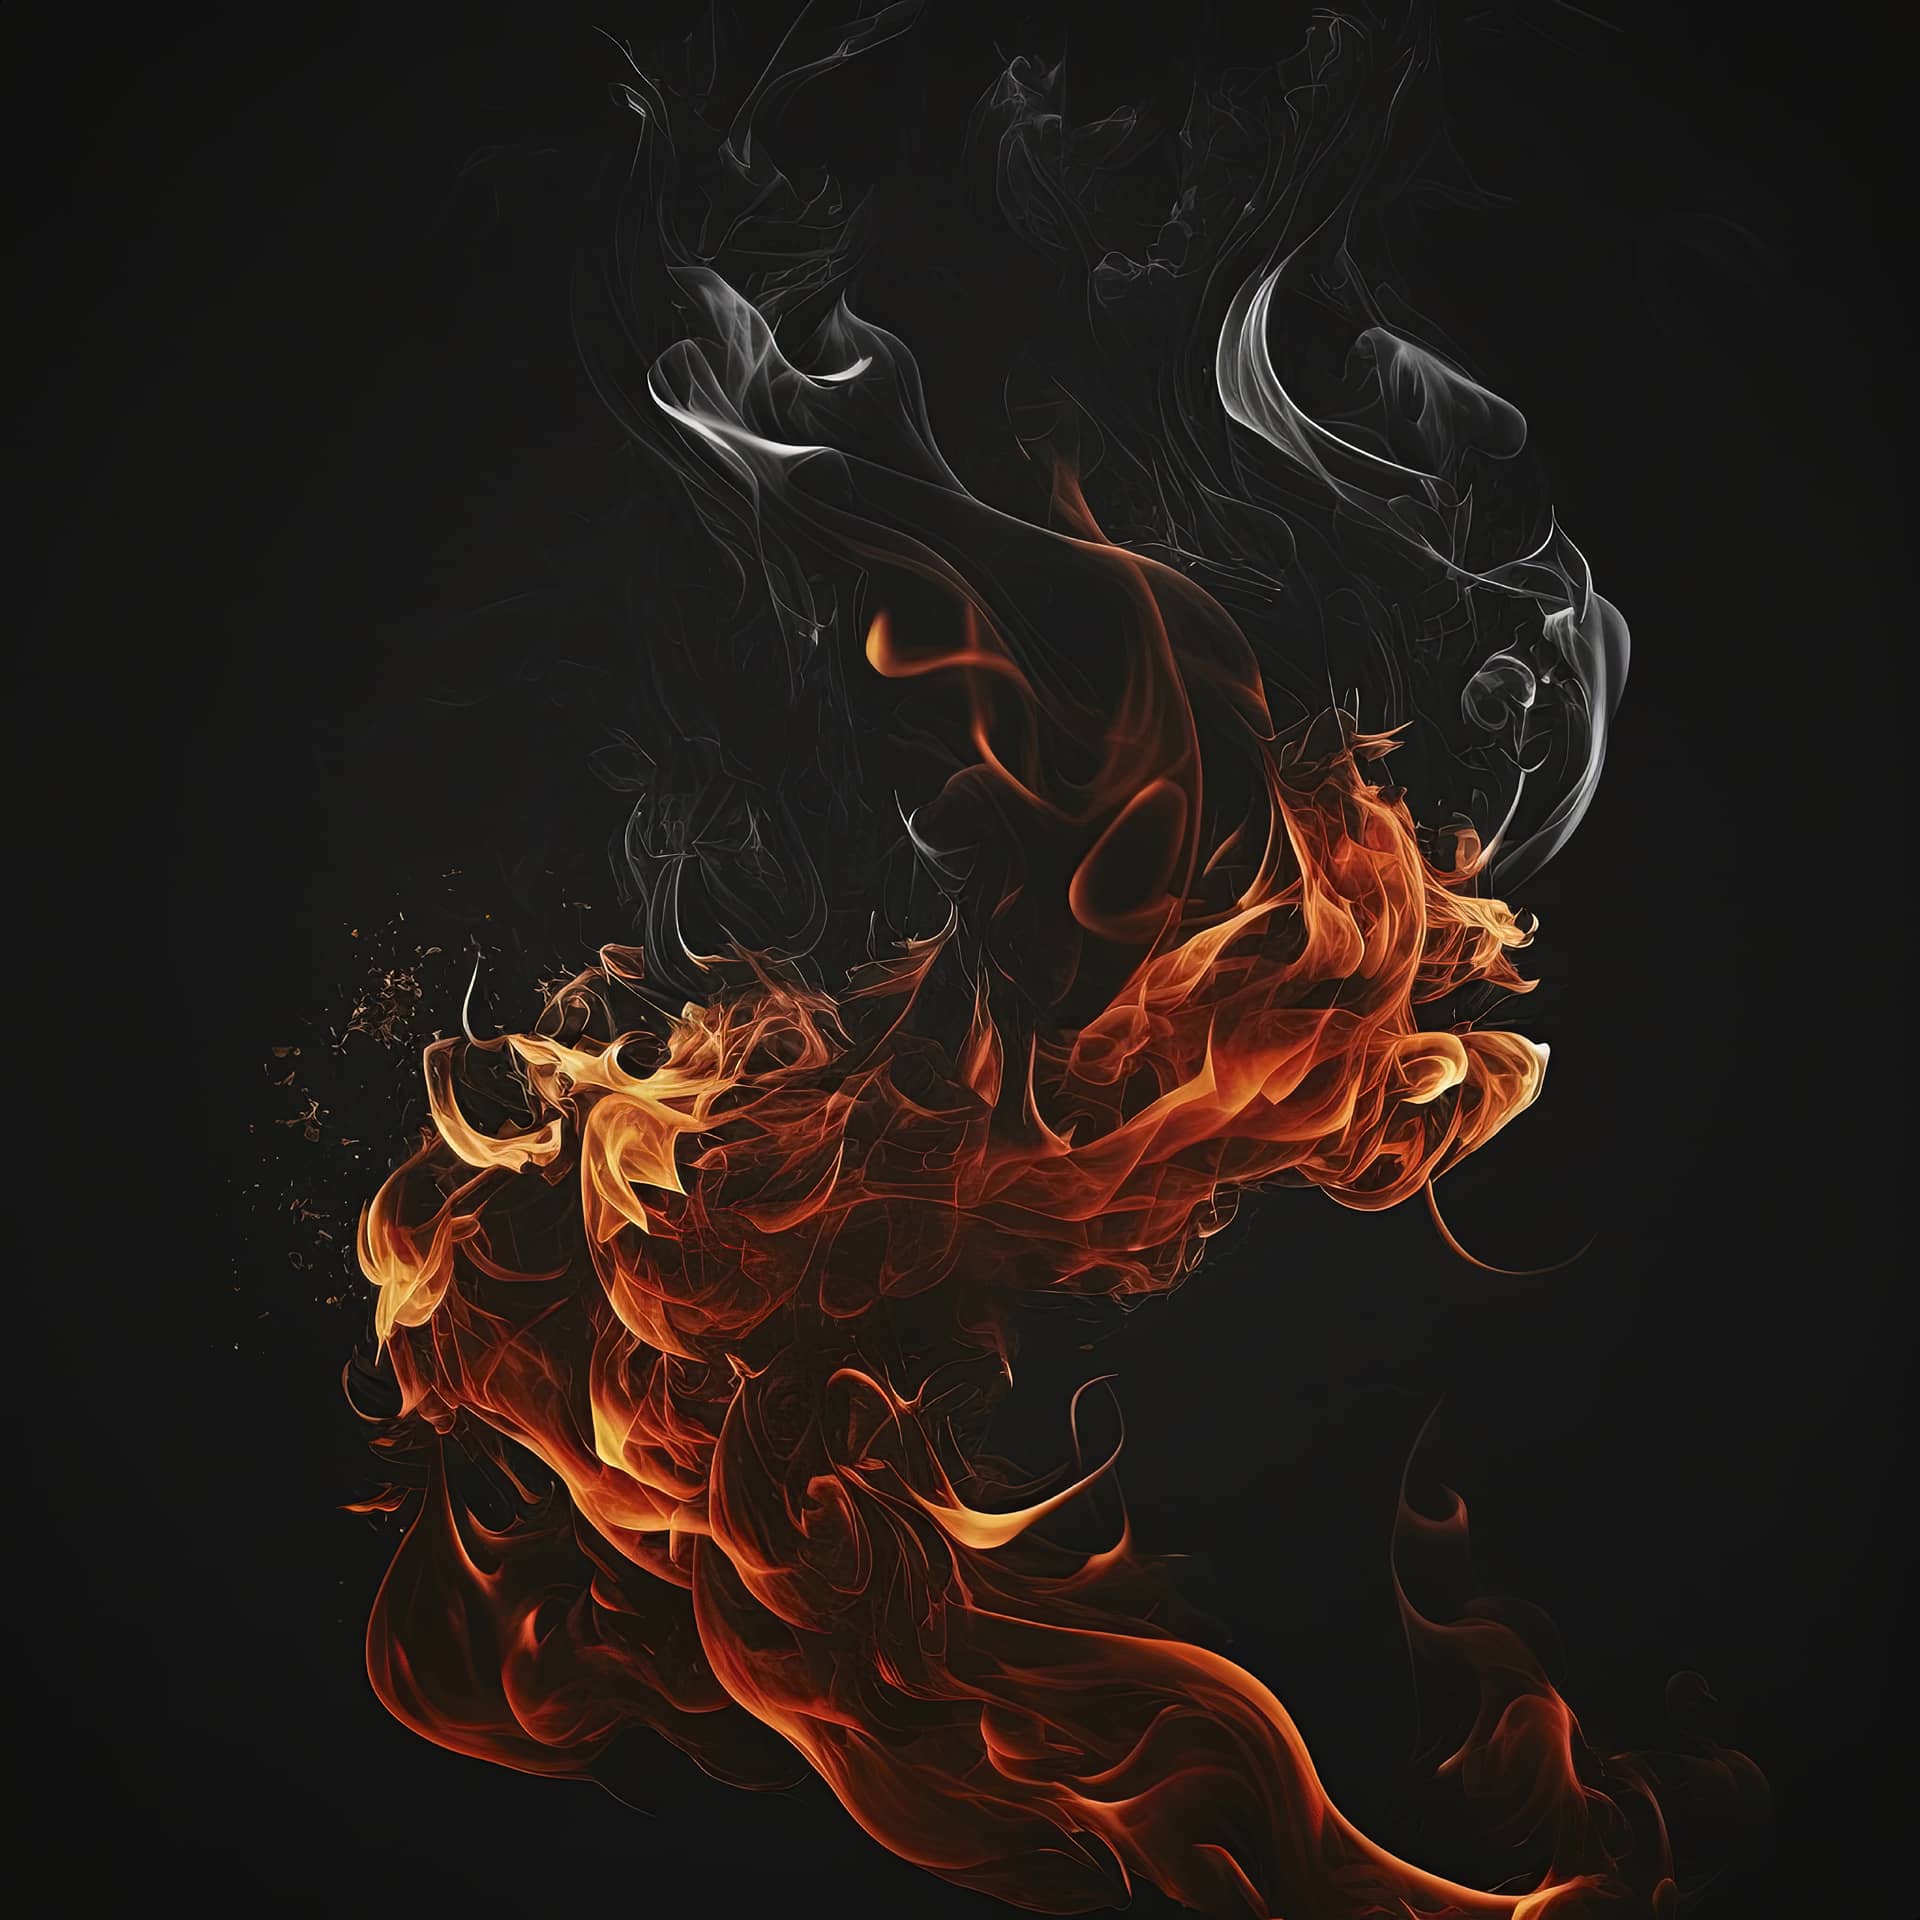 Fire background nice image